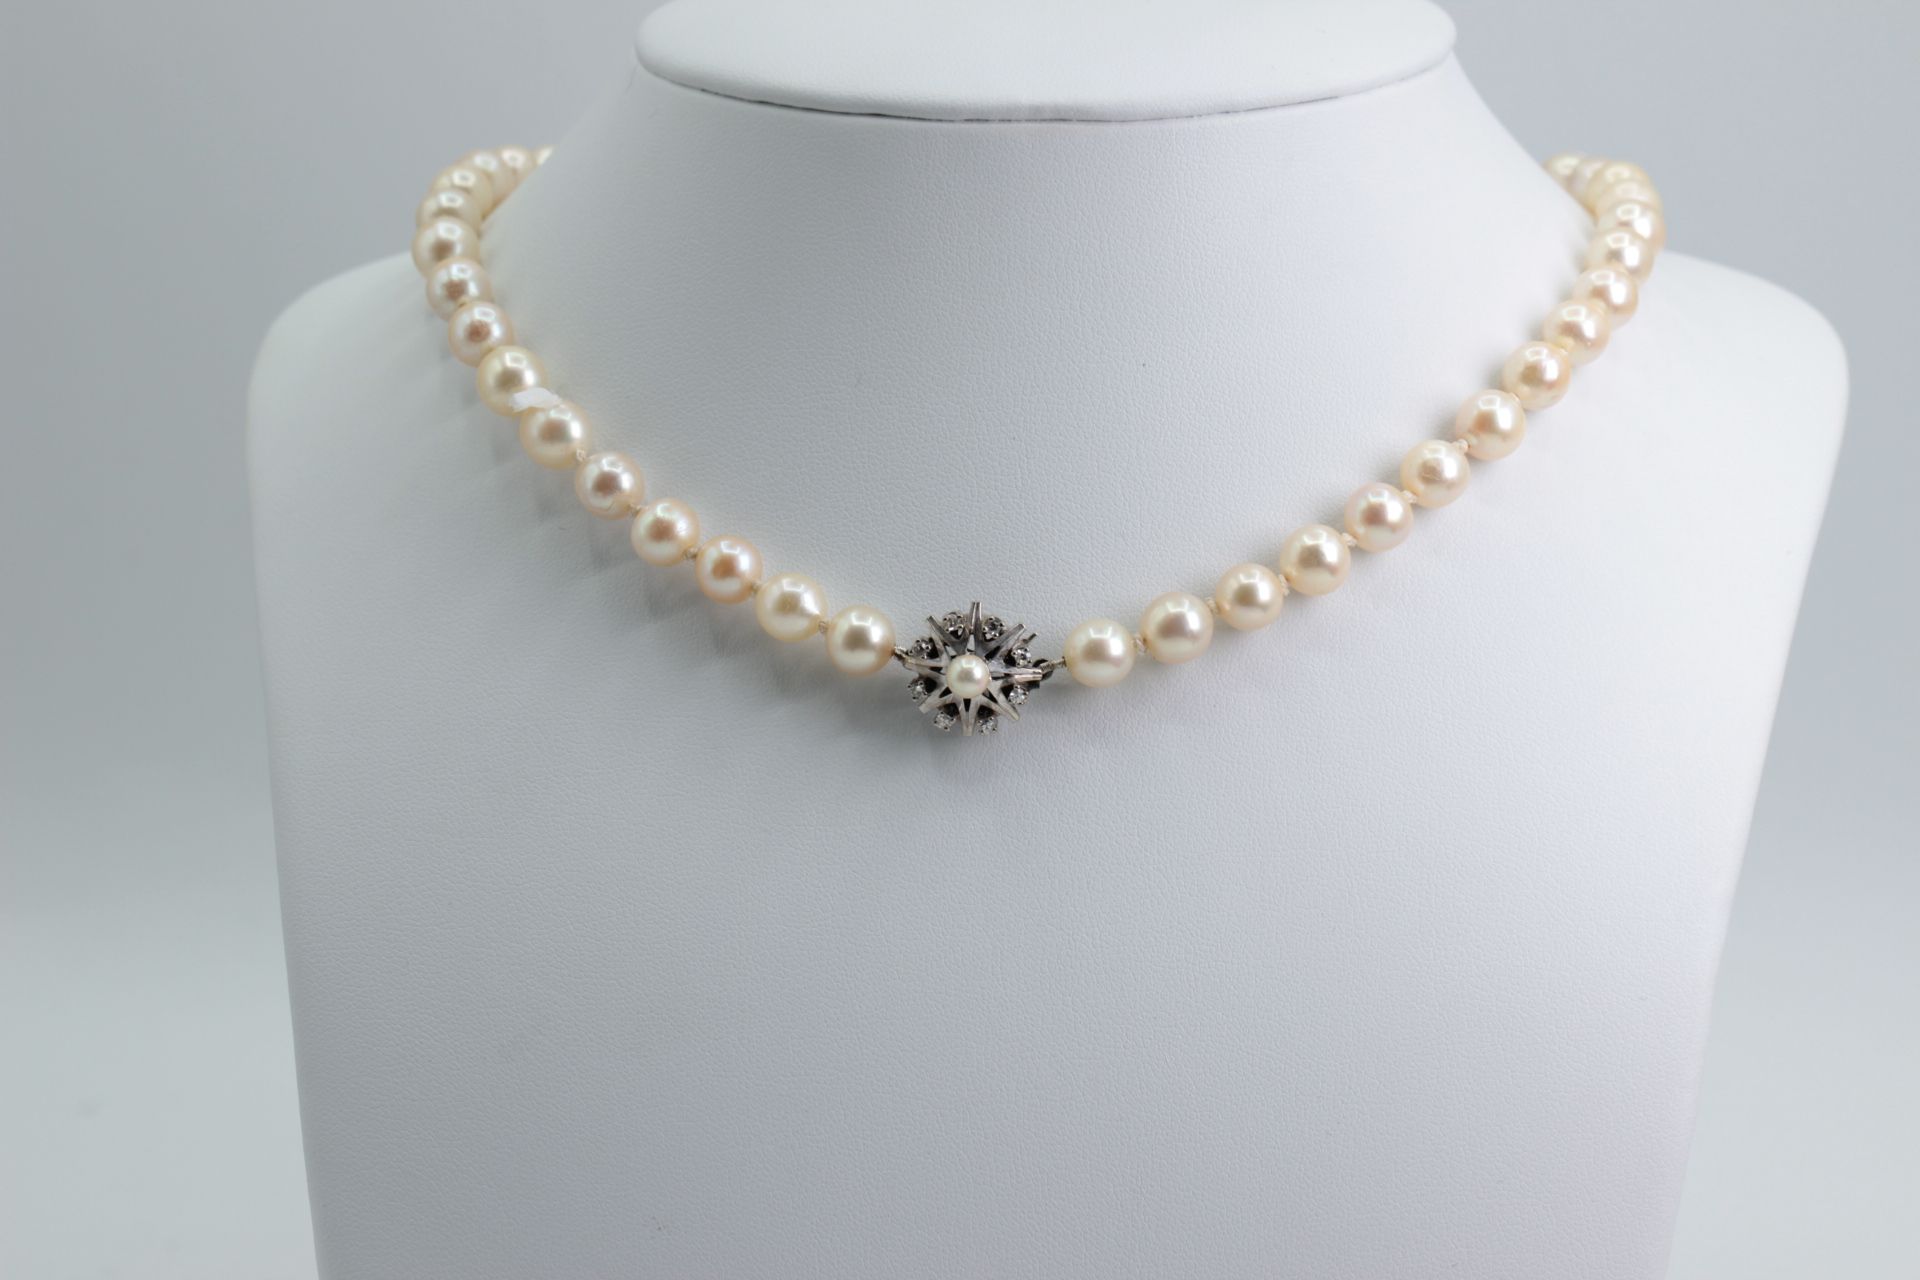 Akoya pearl necklace with white gold clasp, stamped 585. Clasp has 8 small diamonds, with a pearl